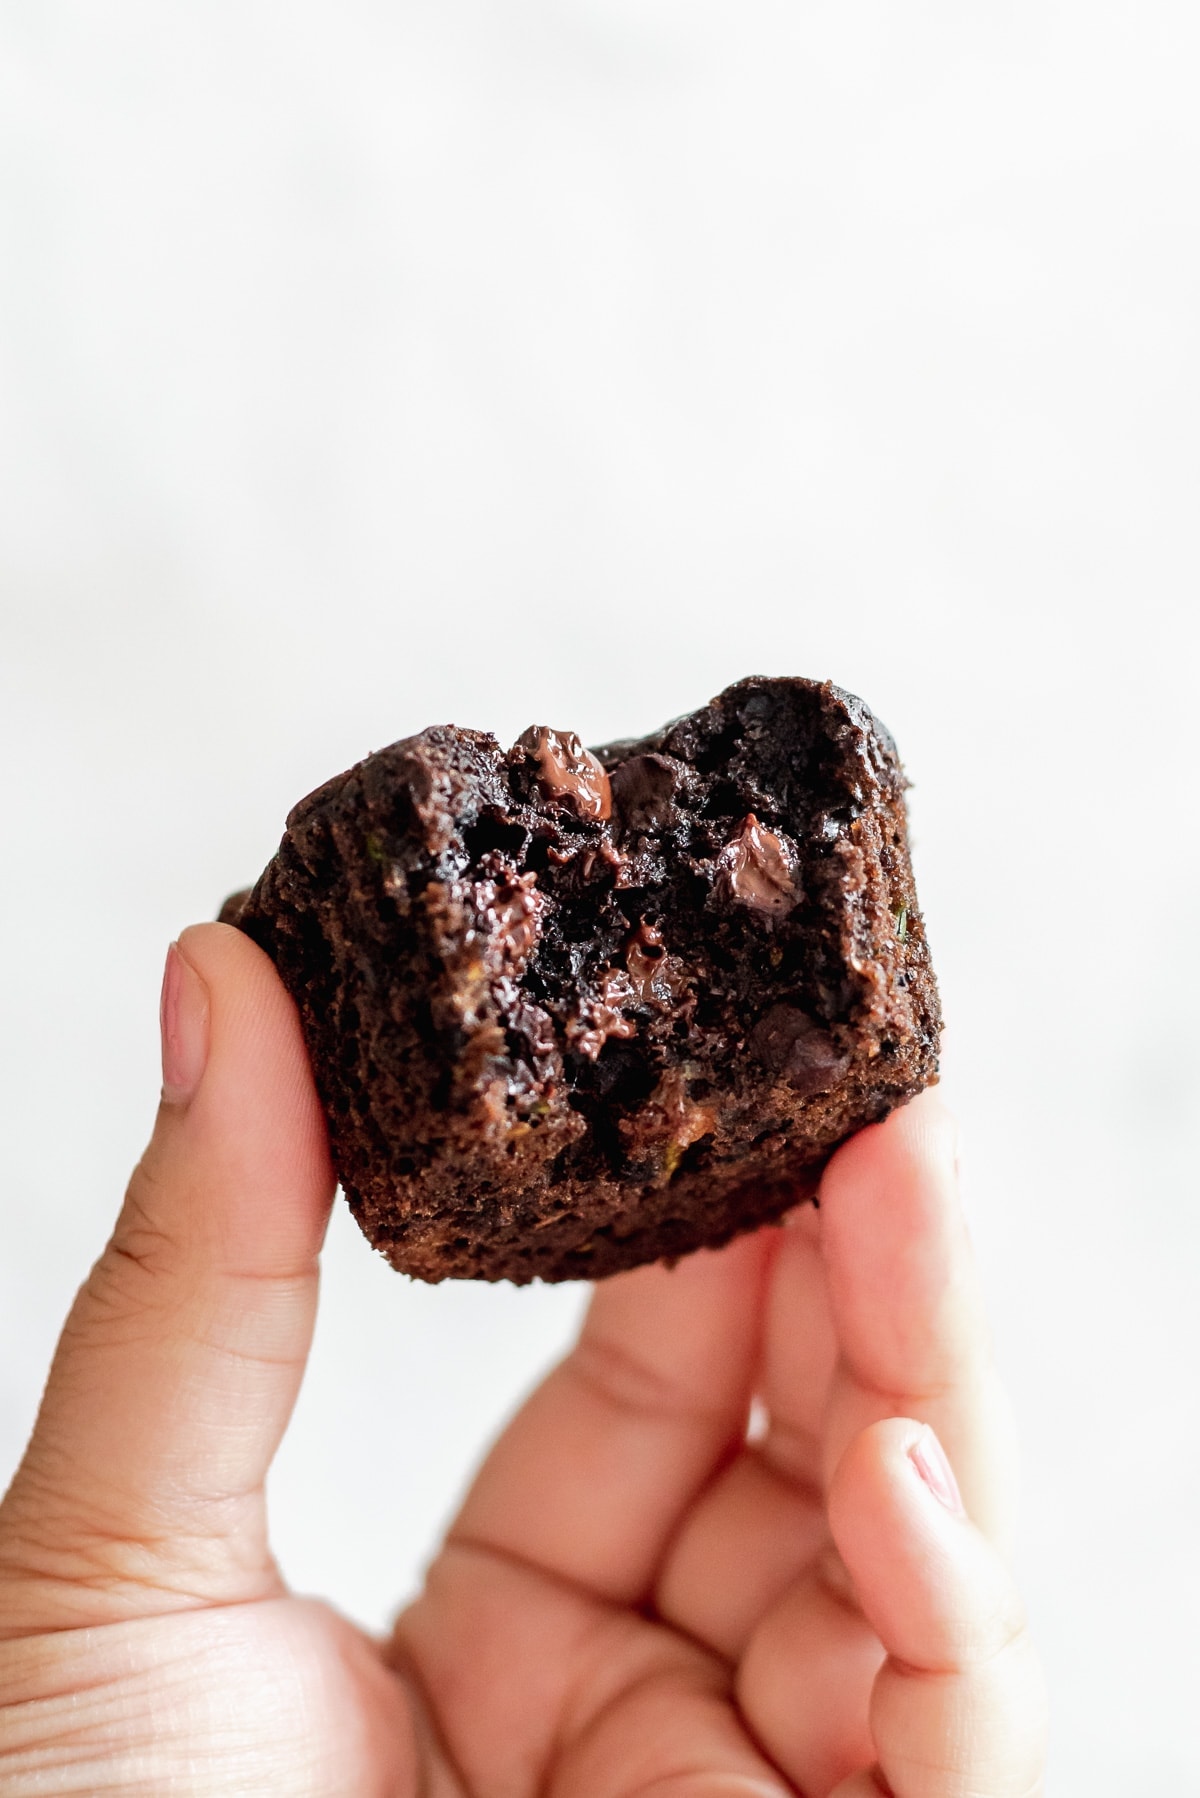 hand holding muffin showing gooey chocolate